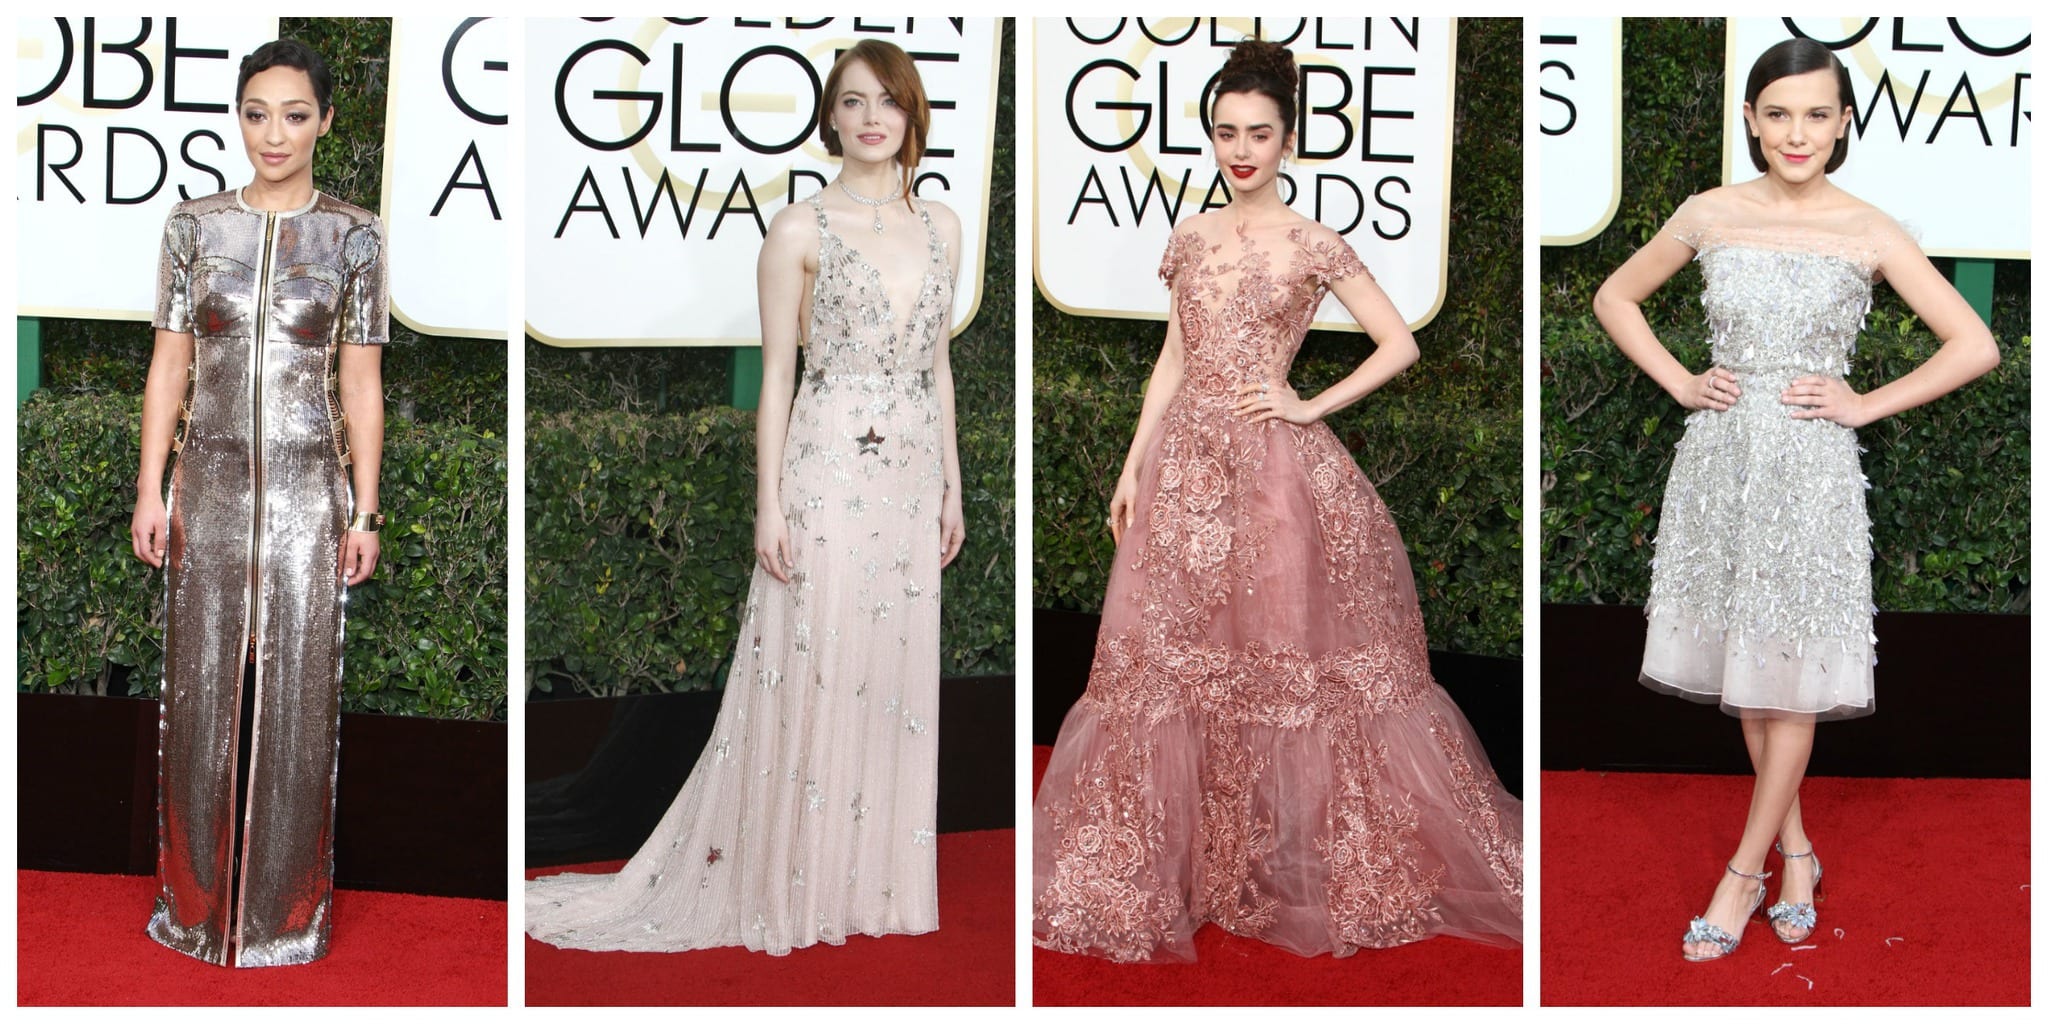 2017 Golden Globes fashion: Ruth Negga in Louis Vuitton, Emma Stone in Valentino, Lily Collins in Zuhair Murad Couture, and Millie Bobby Brown in Jenny Packham